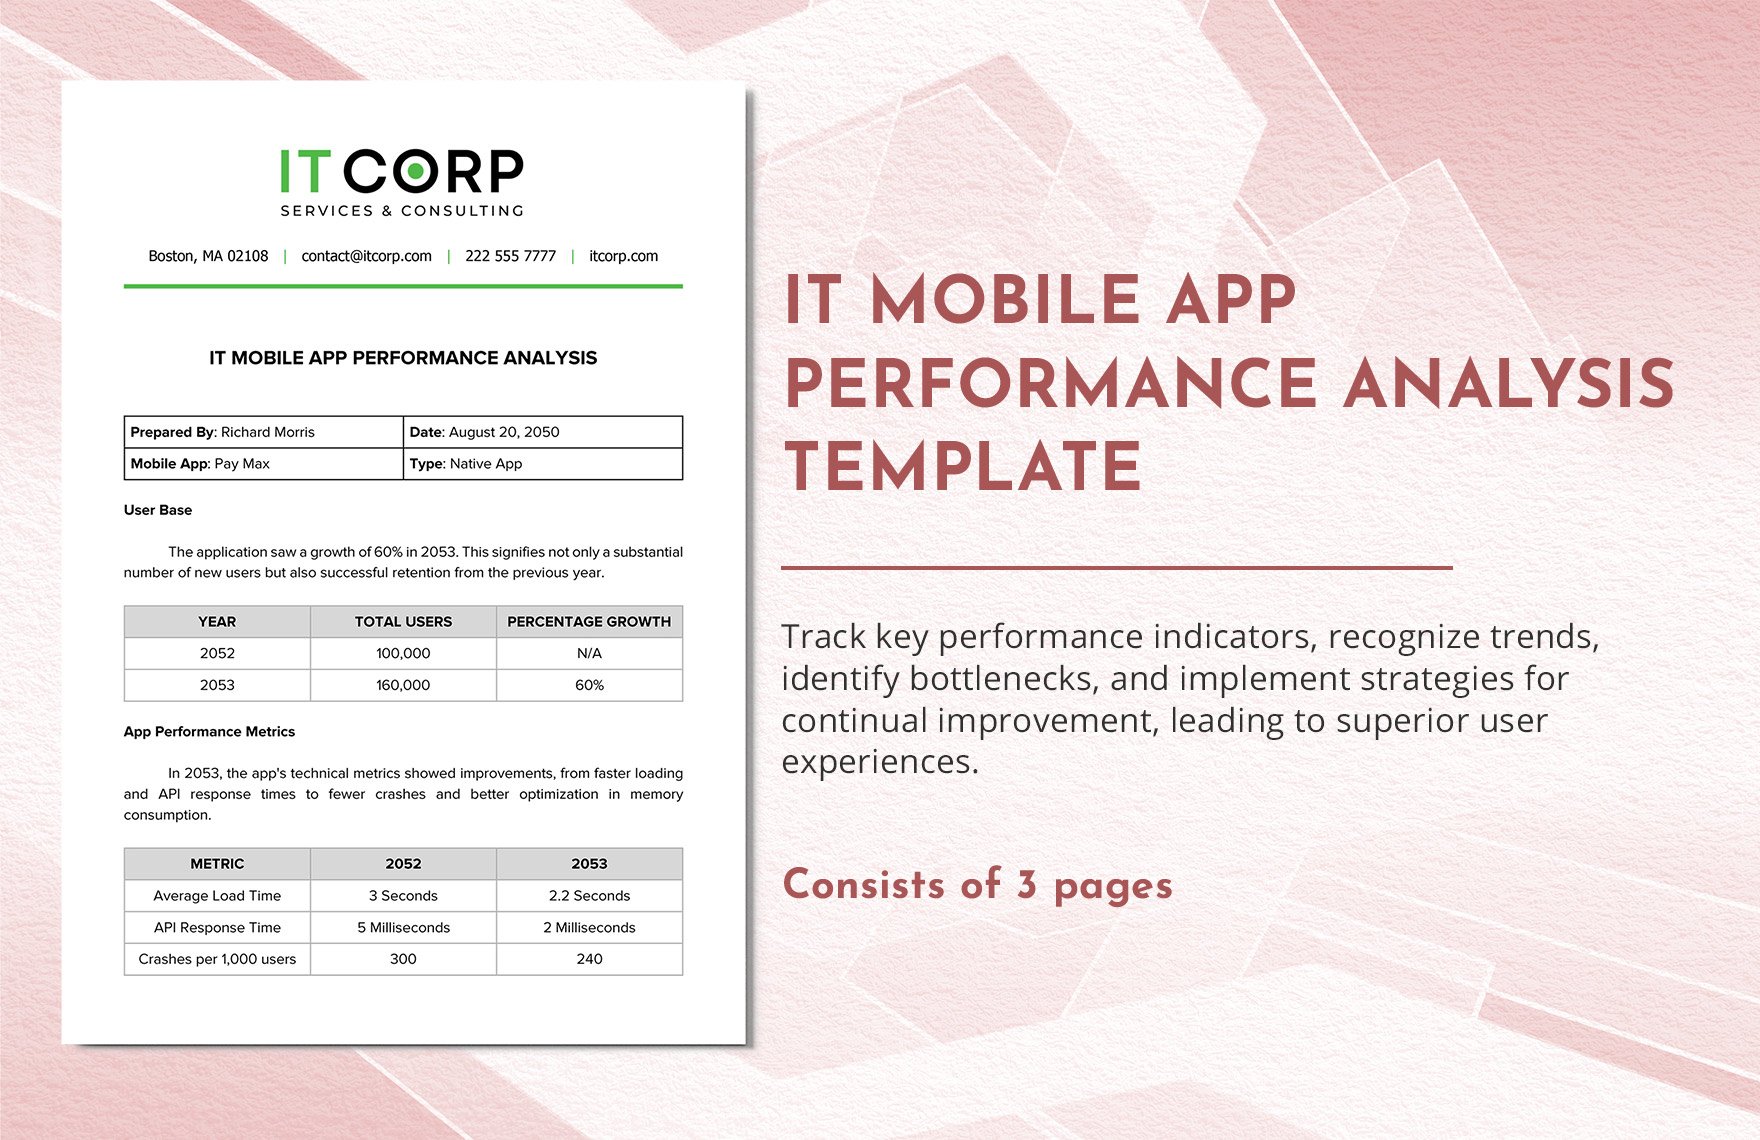 IT Mobile App Performance Analysis Template